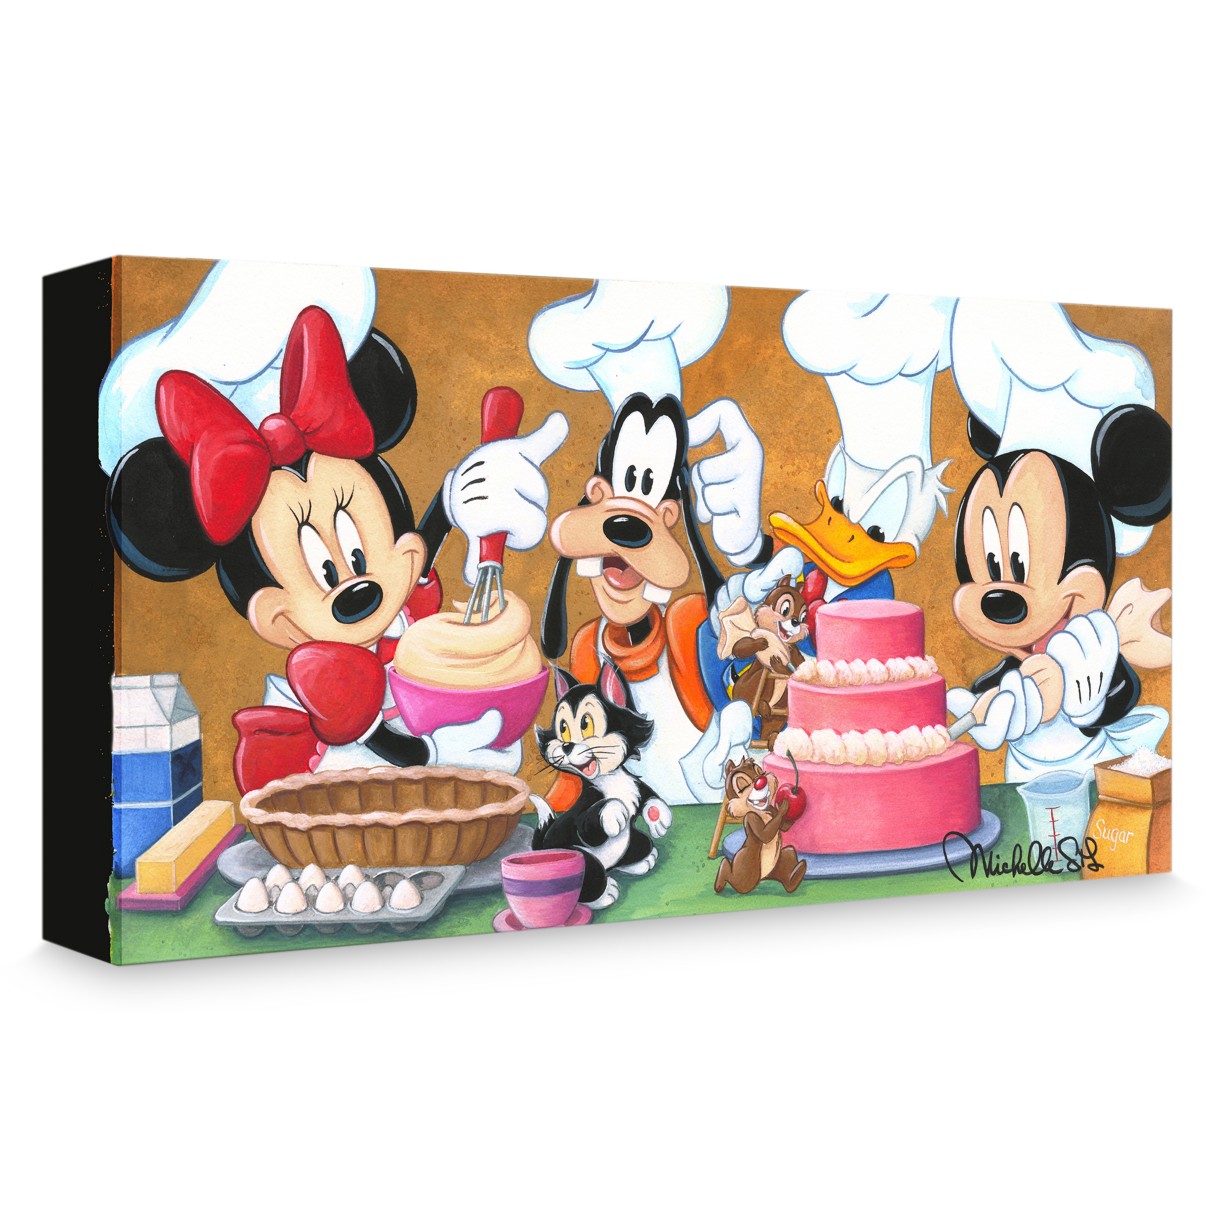 Mickey and Minnie Mouse kitchen  Mickey mouse kitchen, Minnie